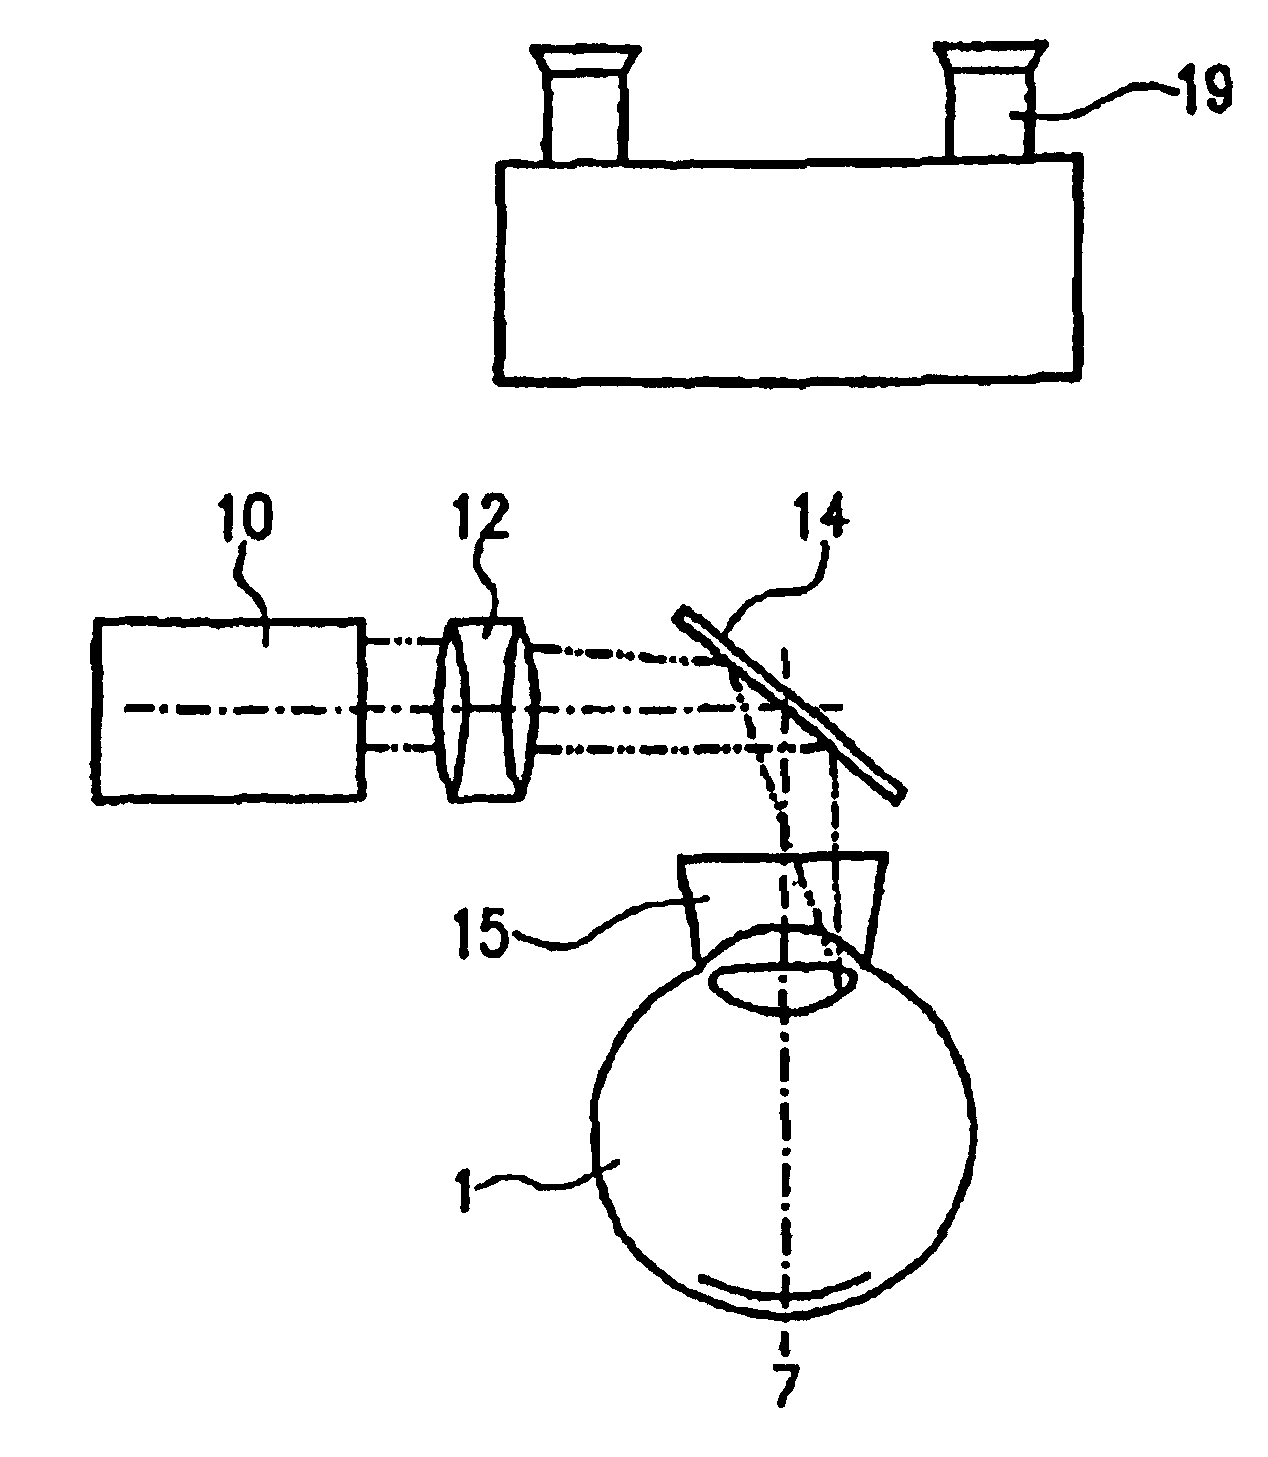 Method and device for treating opaqueness and/or hardening of a closed eye